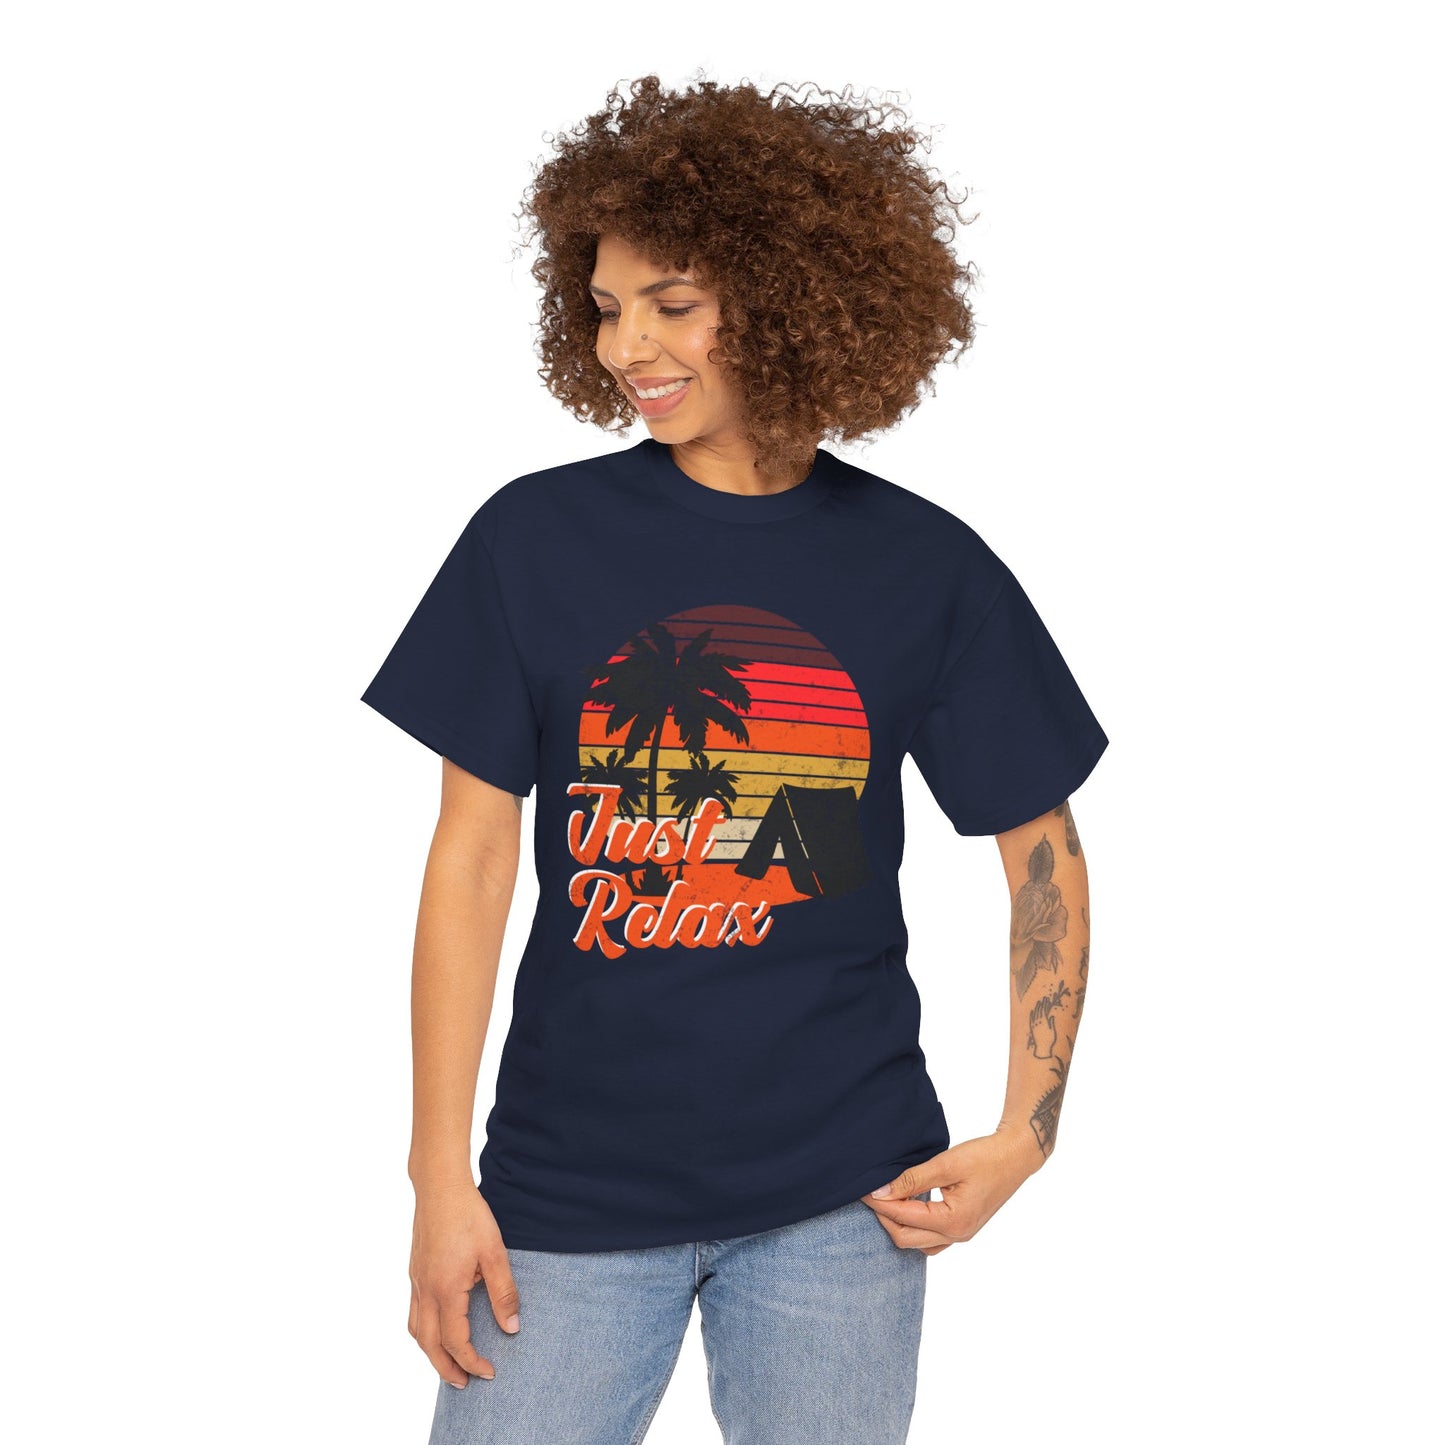 T-shirt - "Just Relax" Heavy Cotton Tee, 100% Cotton, Classic Fit, Runs True to Size, Sizes Small - 3XL